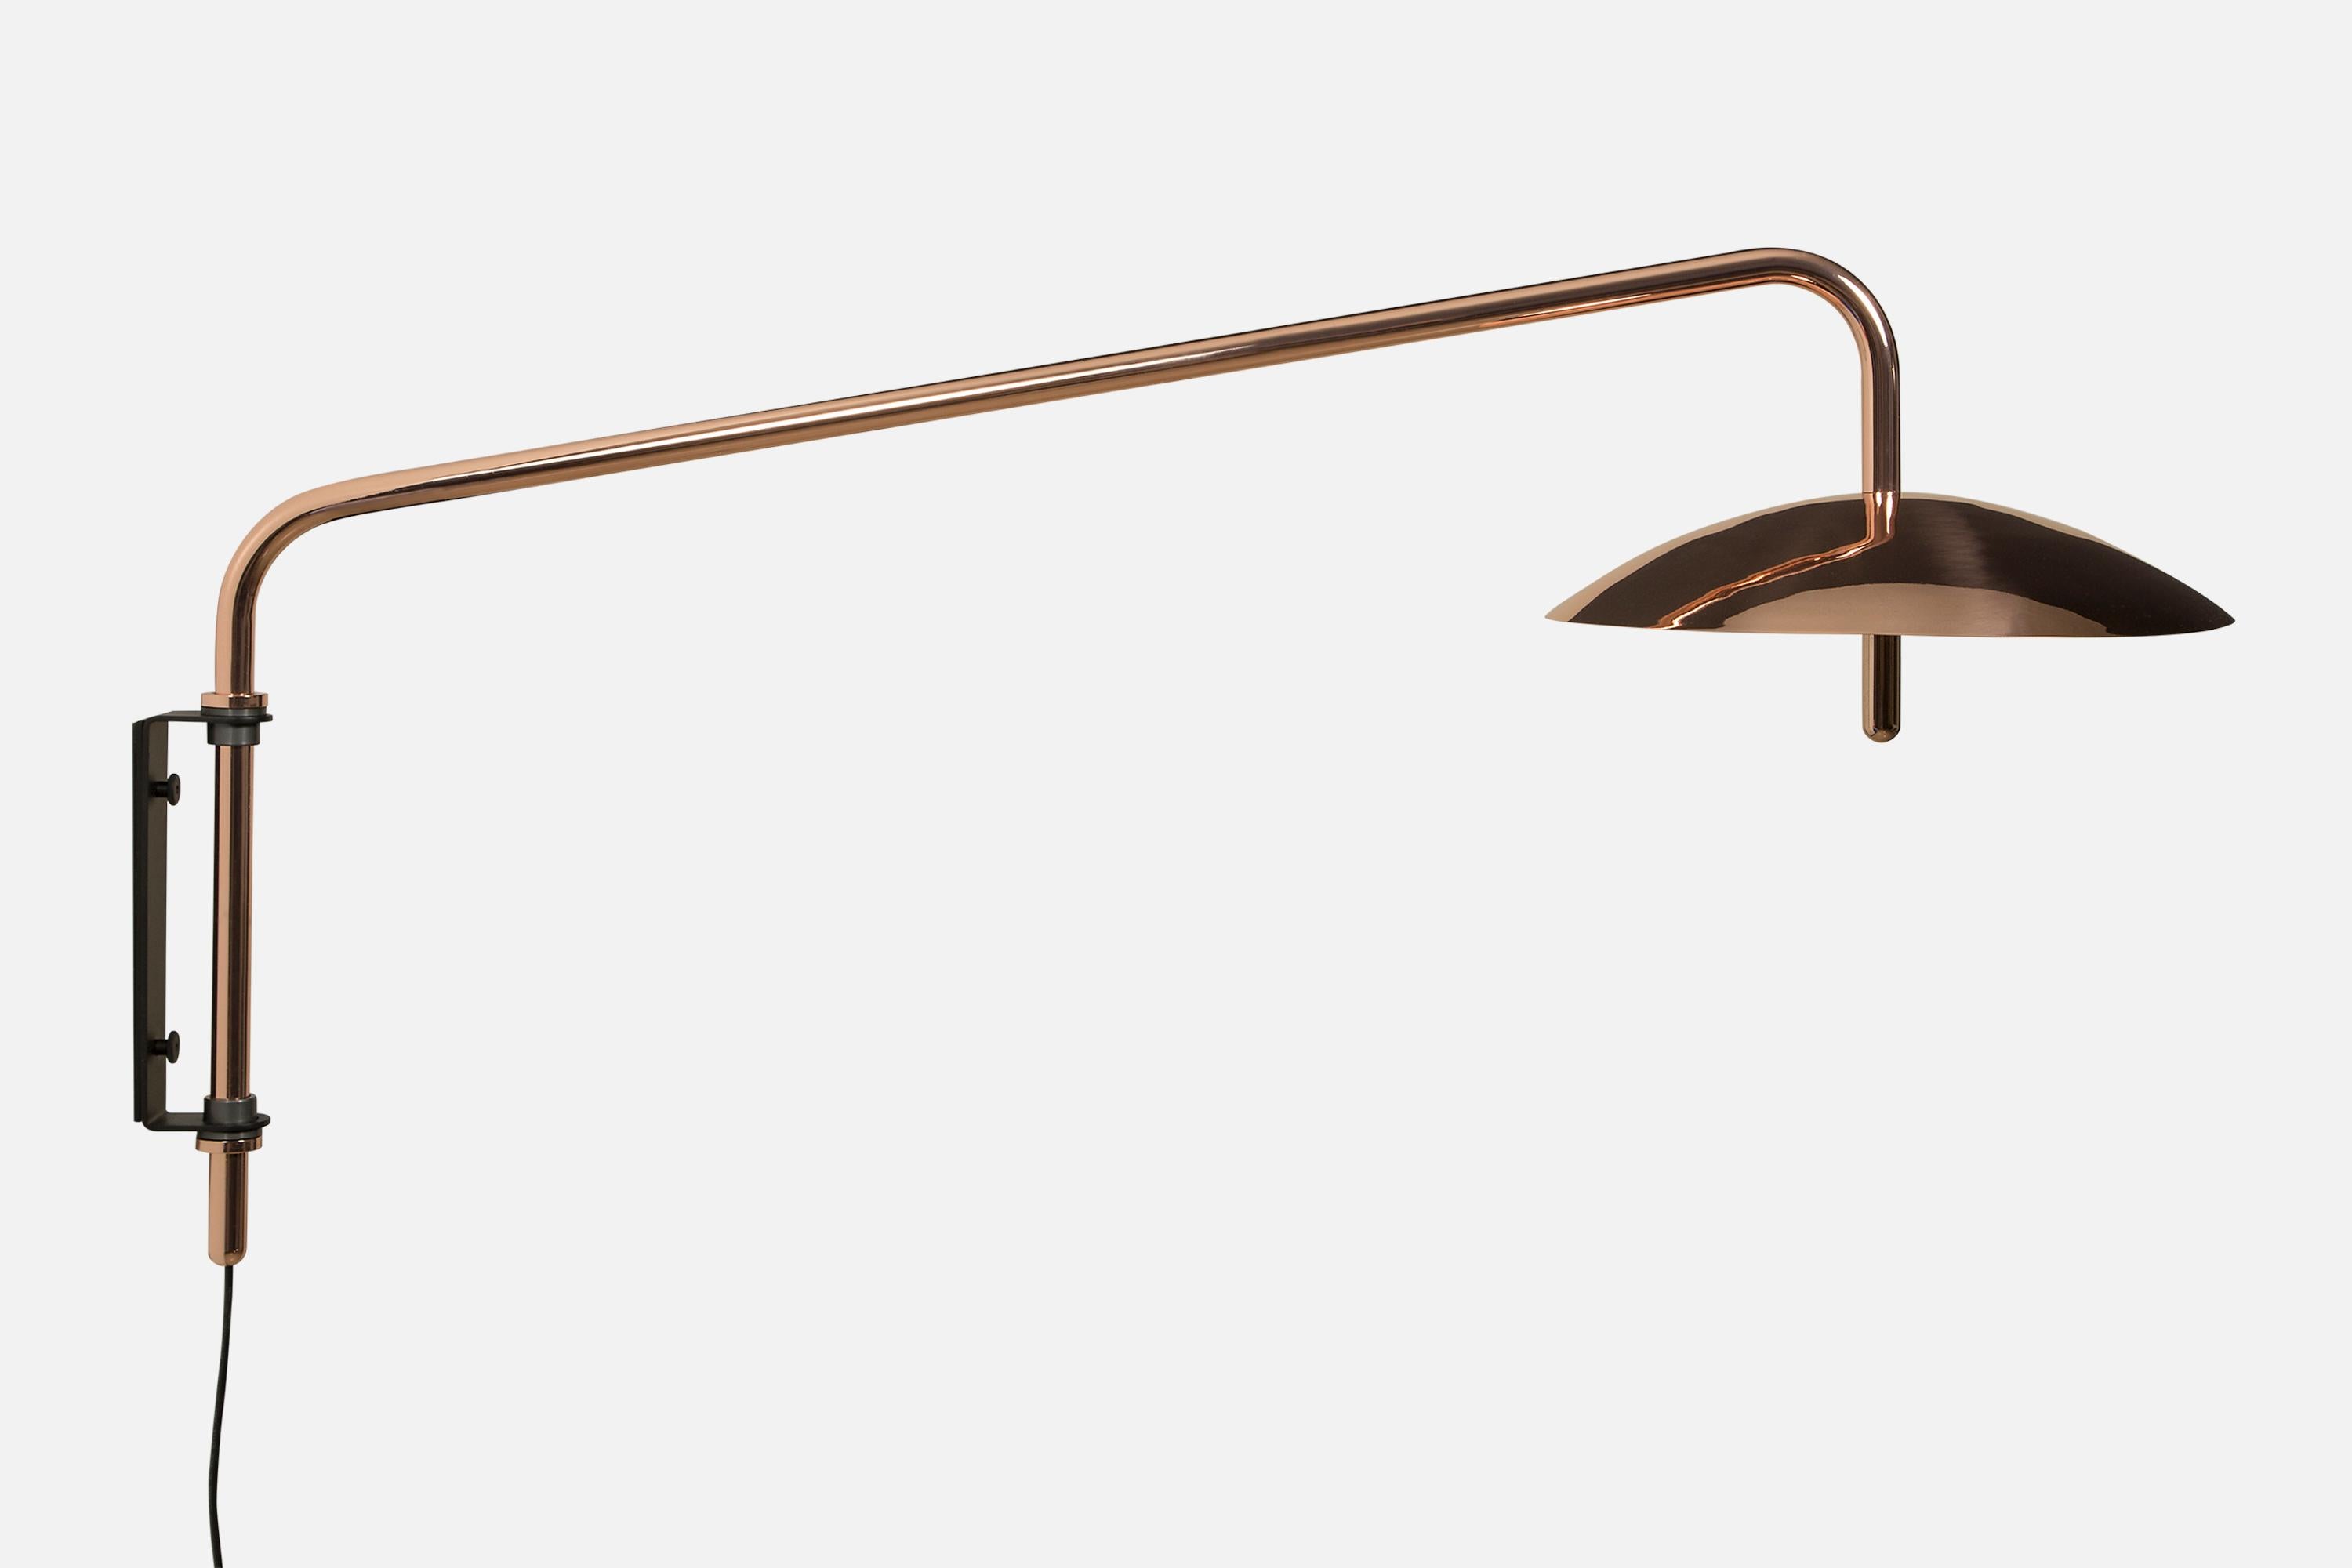 Modern Customizable Signal Arm Sconce in Black x Copper, Long by Souda, in Stock